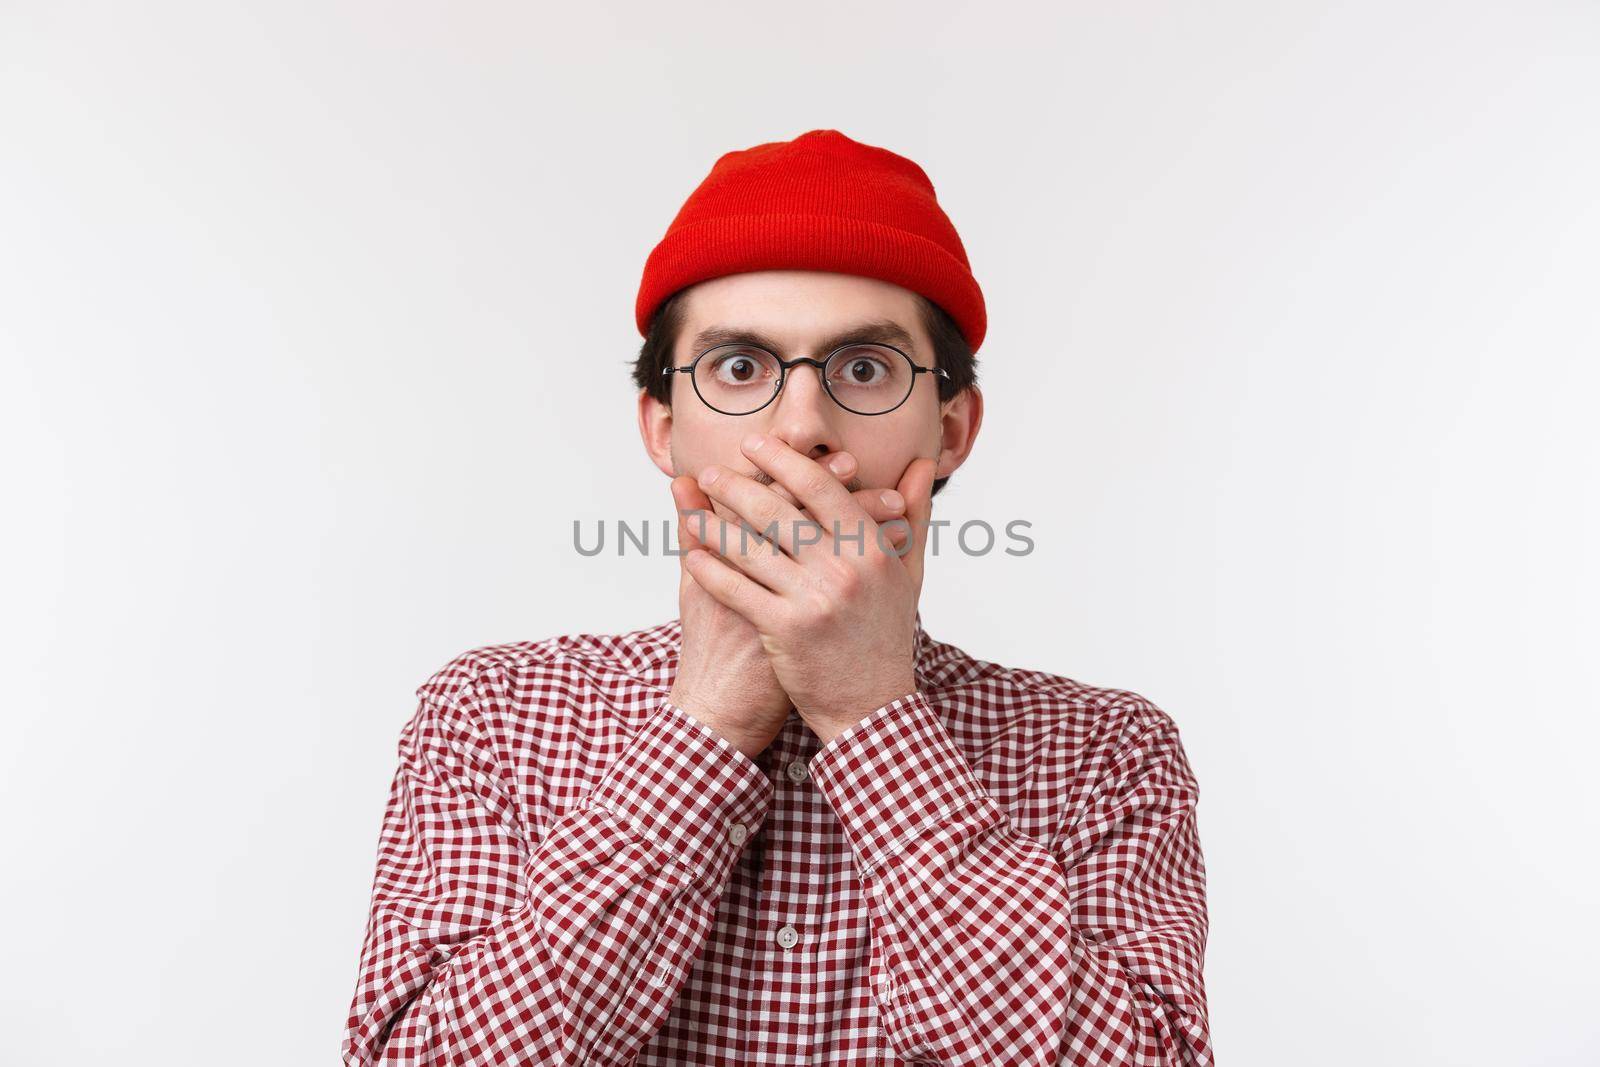 Close-up portrait of shocked young man heard something unbelievable and shook, close mouth with hands stare at camera as if gossiping about concerning thing, standing white background.